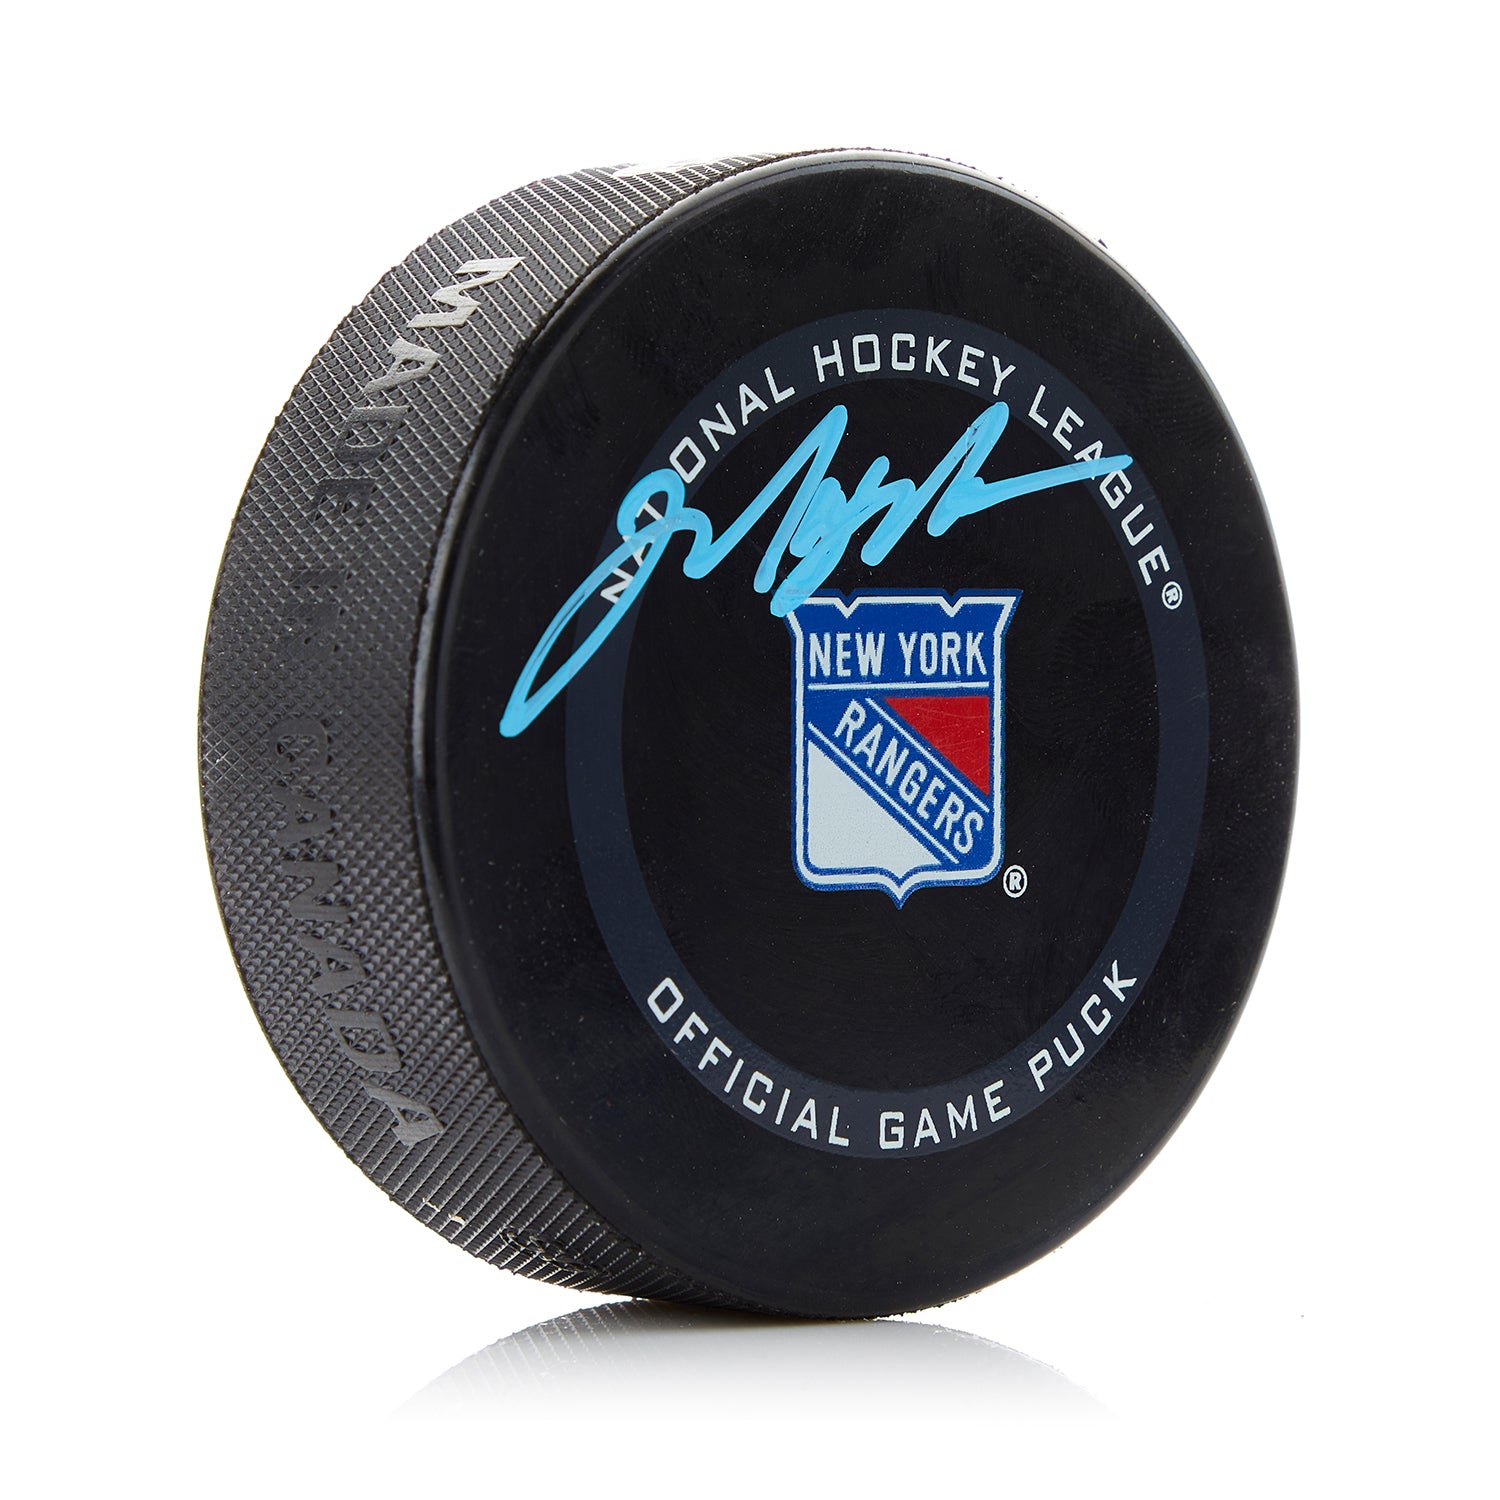 Mark Messier New York Rangers Autographed Official Game Puck